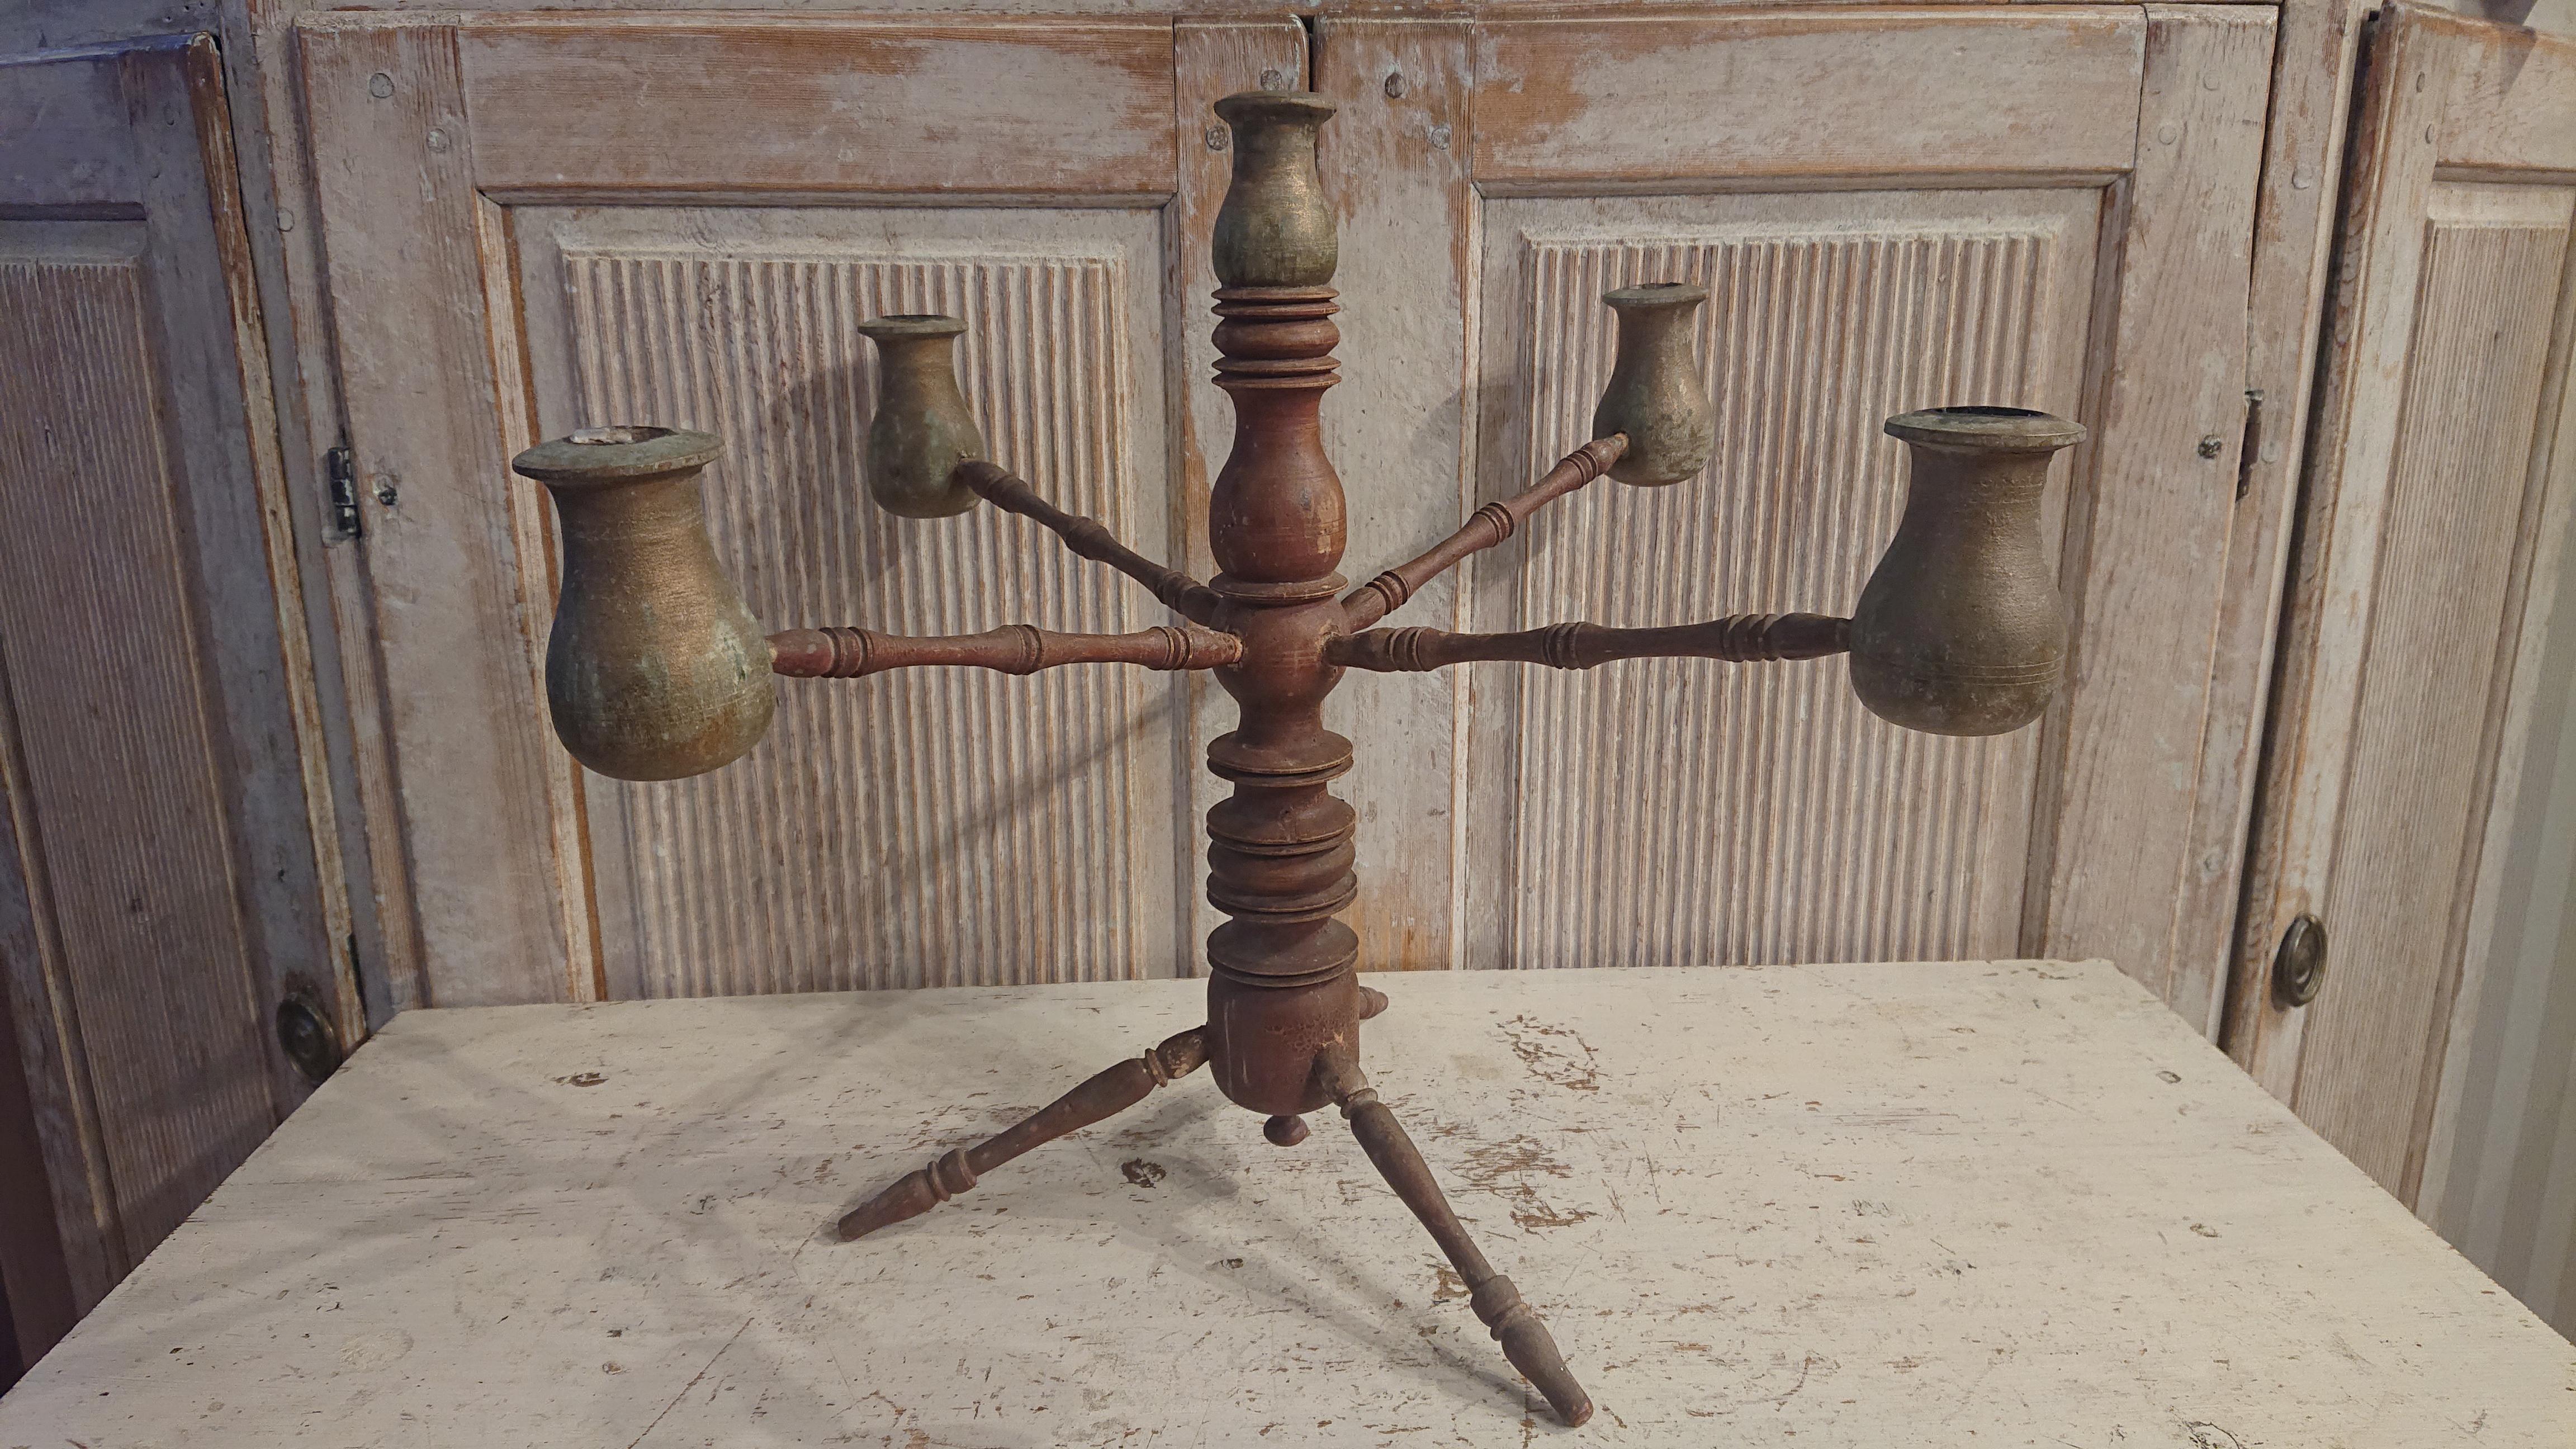 19th Century Swedish wooden candelabra from 
Unusual and fantastically nice wooden calendabra with untouched original paint.
The dimension of the candle holders are 2 cm.
Good antique condition with minor historic knocks, marks, scratchers, wear,